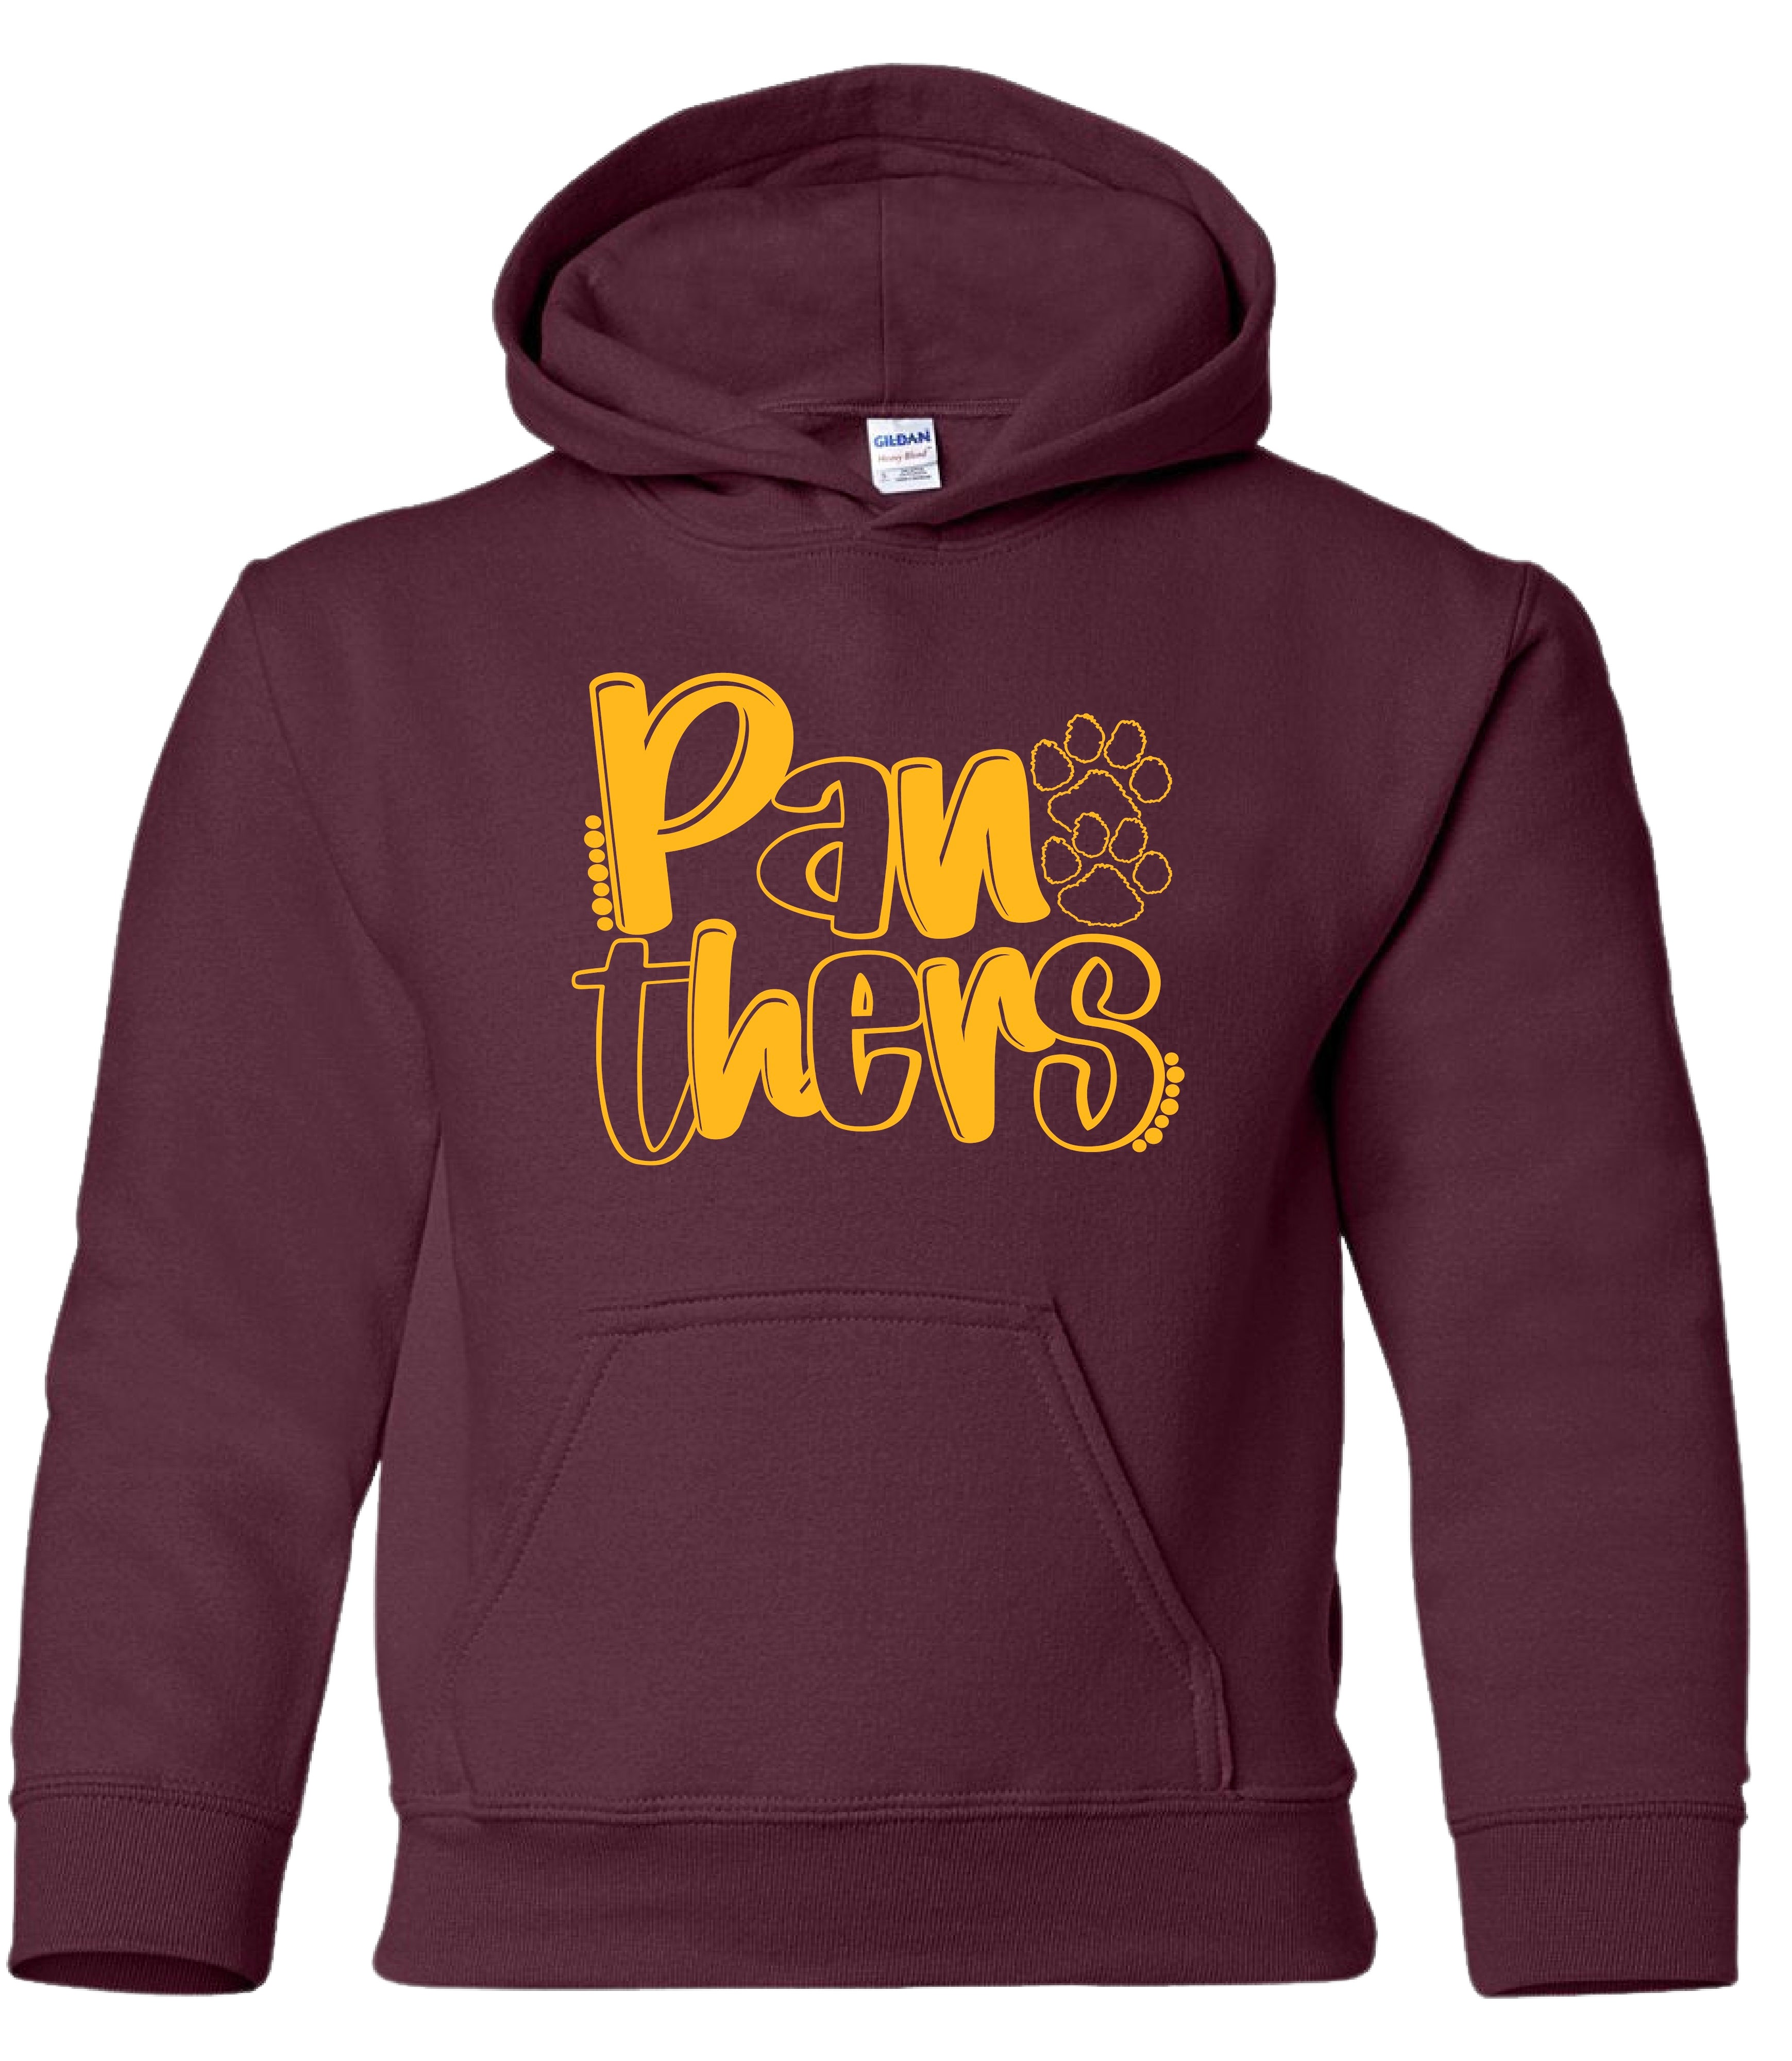 Panthers YOUTH  Tee/Crew Neck/ Hoodie